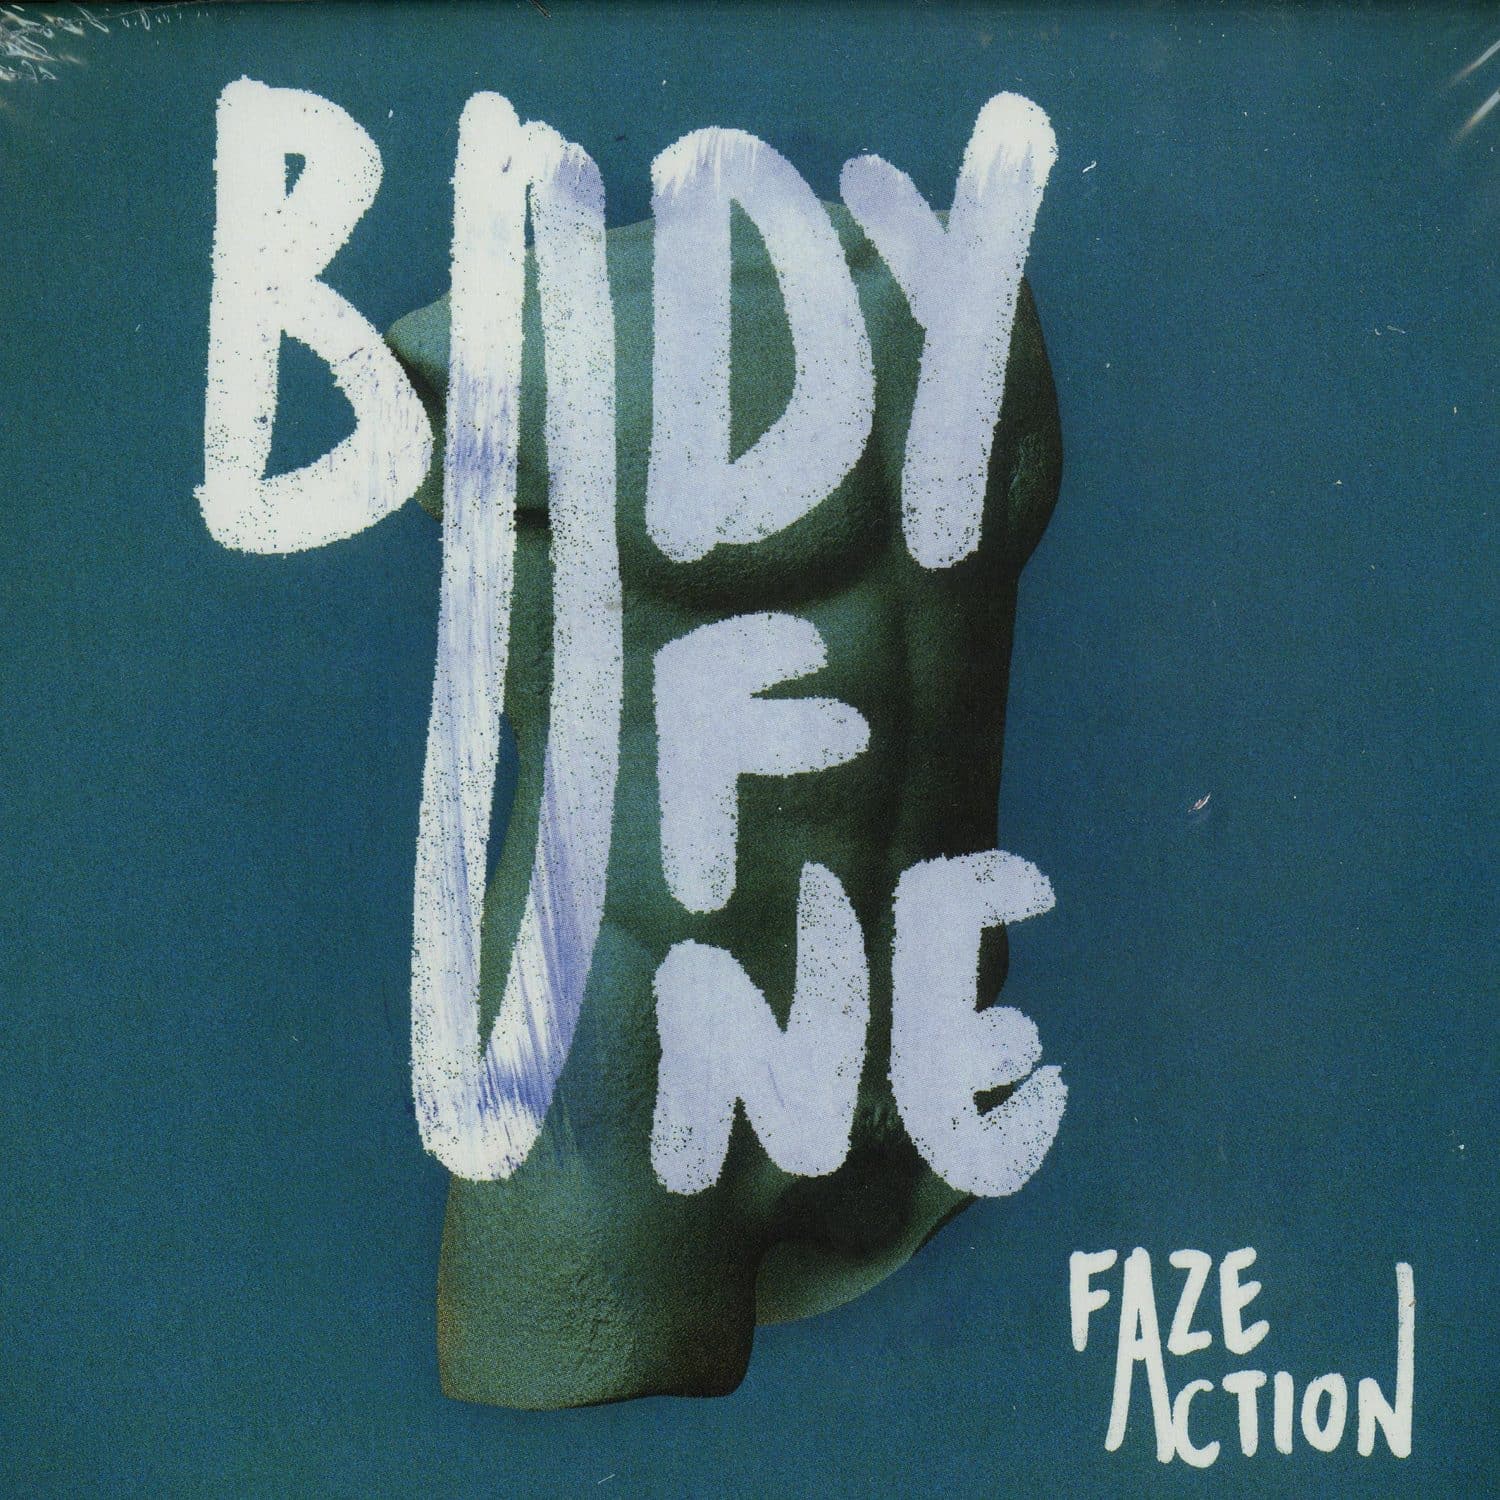 Faze Action - BODY OF ONE 